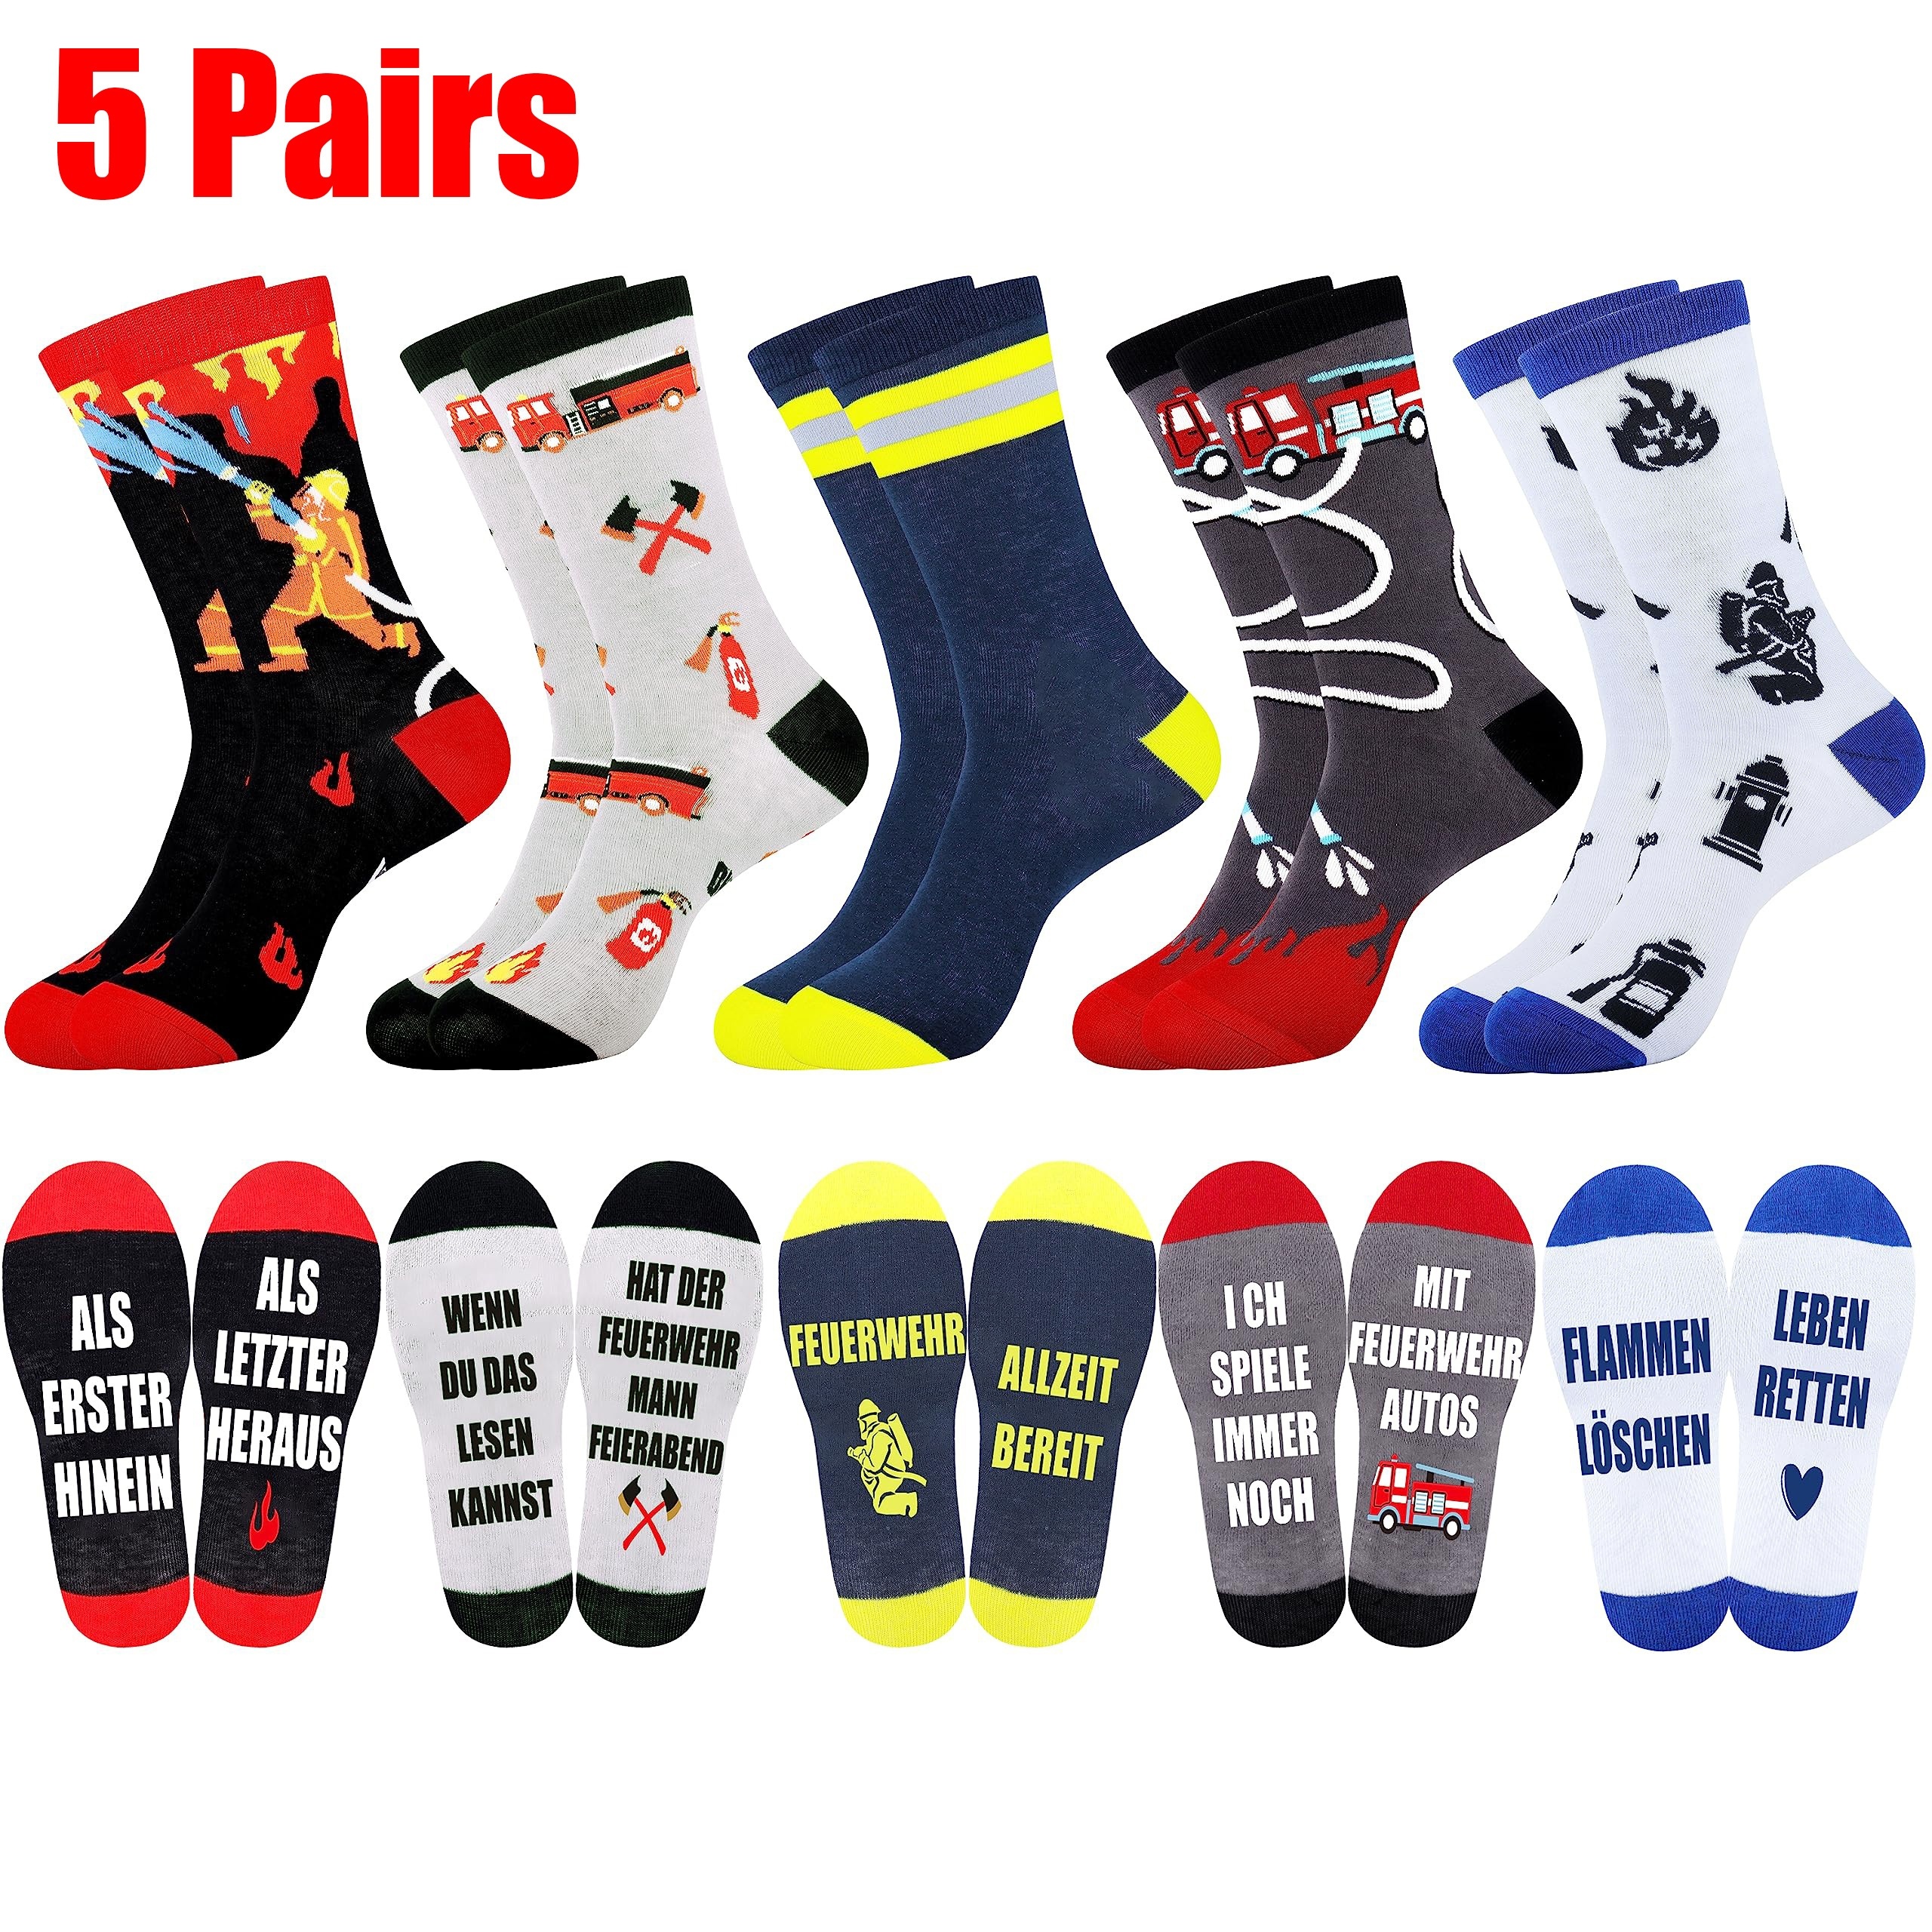 

5 Pairs Fire Brigade Gift Socks For Men, Cotton Blend Fashion Novelty Fun Socks For Firefighters, All Seasons Wearing